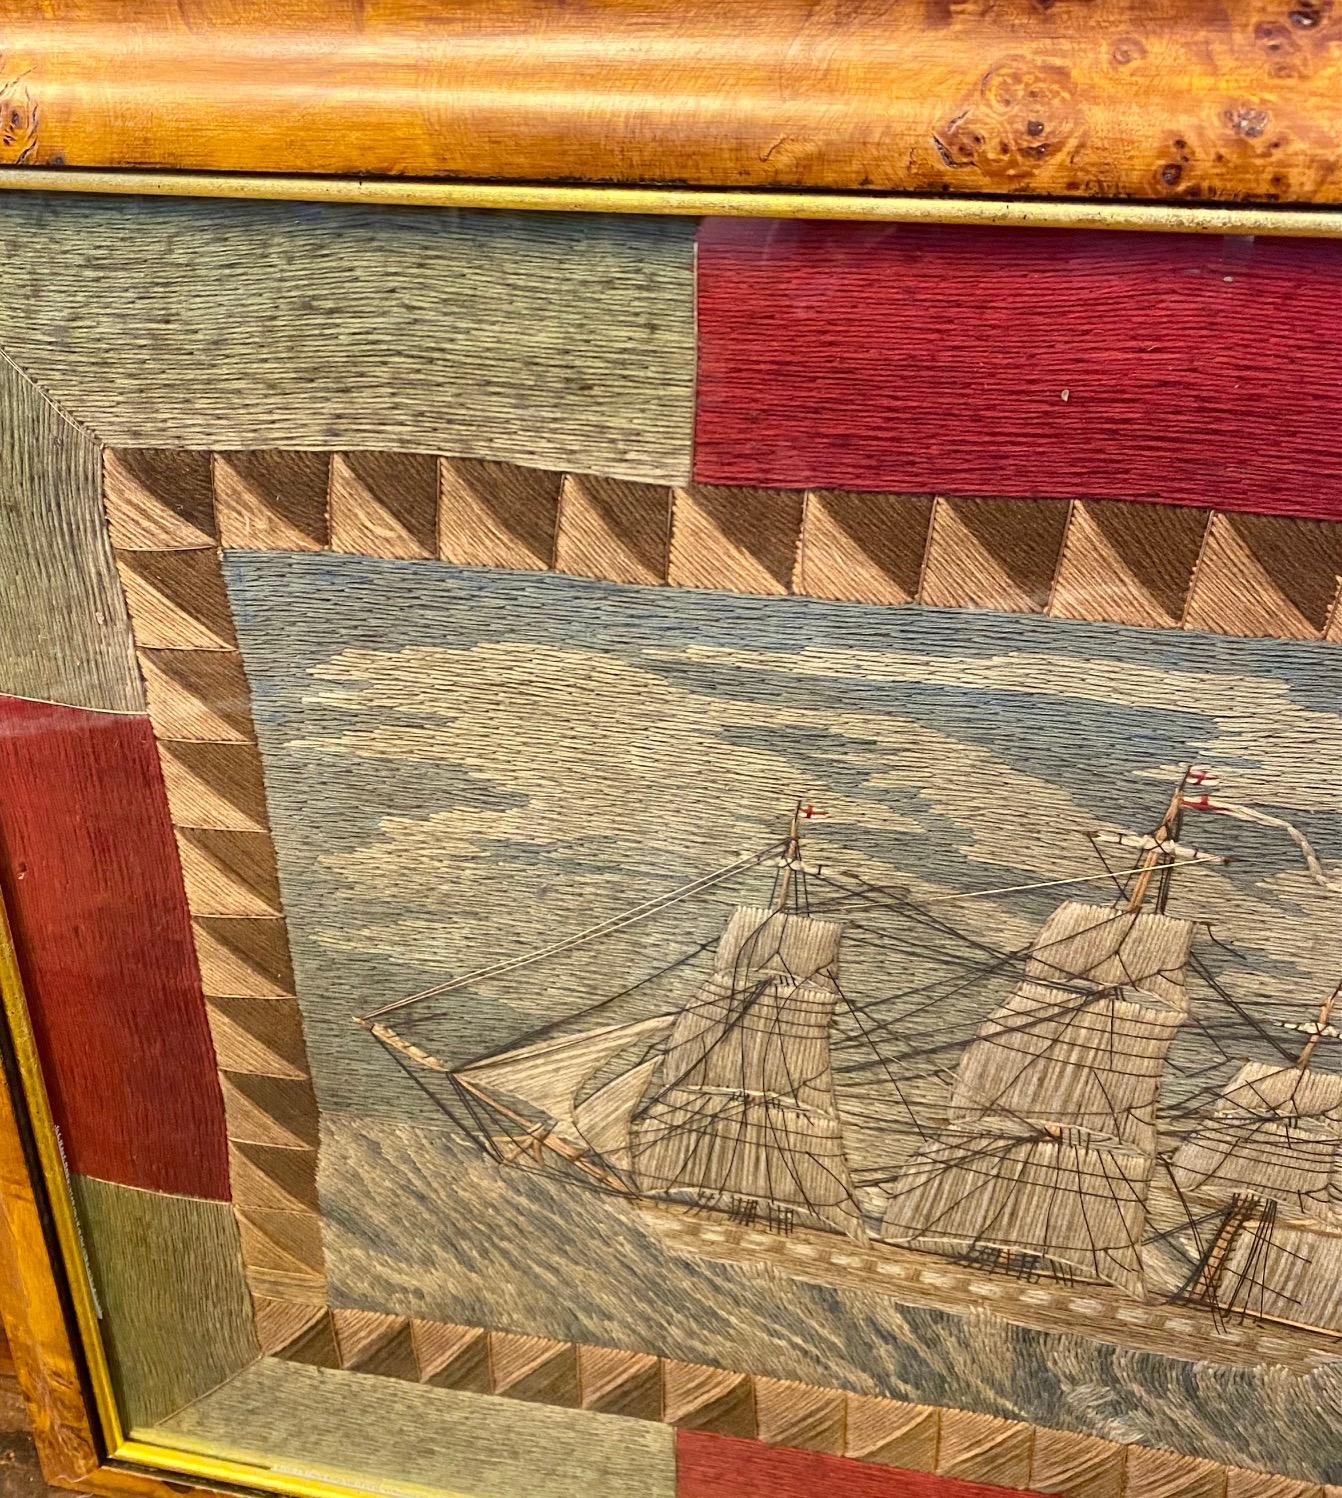 Early 19th century Sailor's Woolwork, circa 1830s - 1840s, depicting a British single decker warship under reefed top-gallant sails, in fantastic high seas under a wild sky, set within a bold sawtooth border. Retaining an old label from The Casson